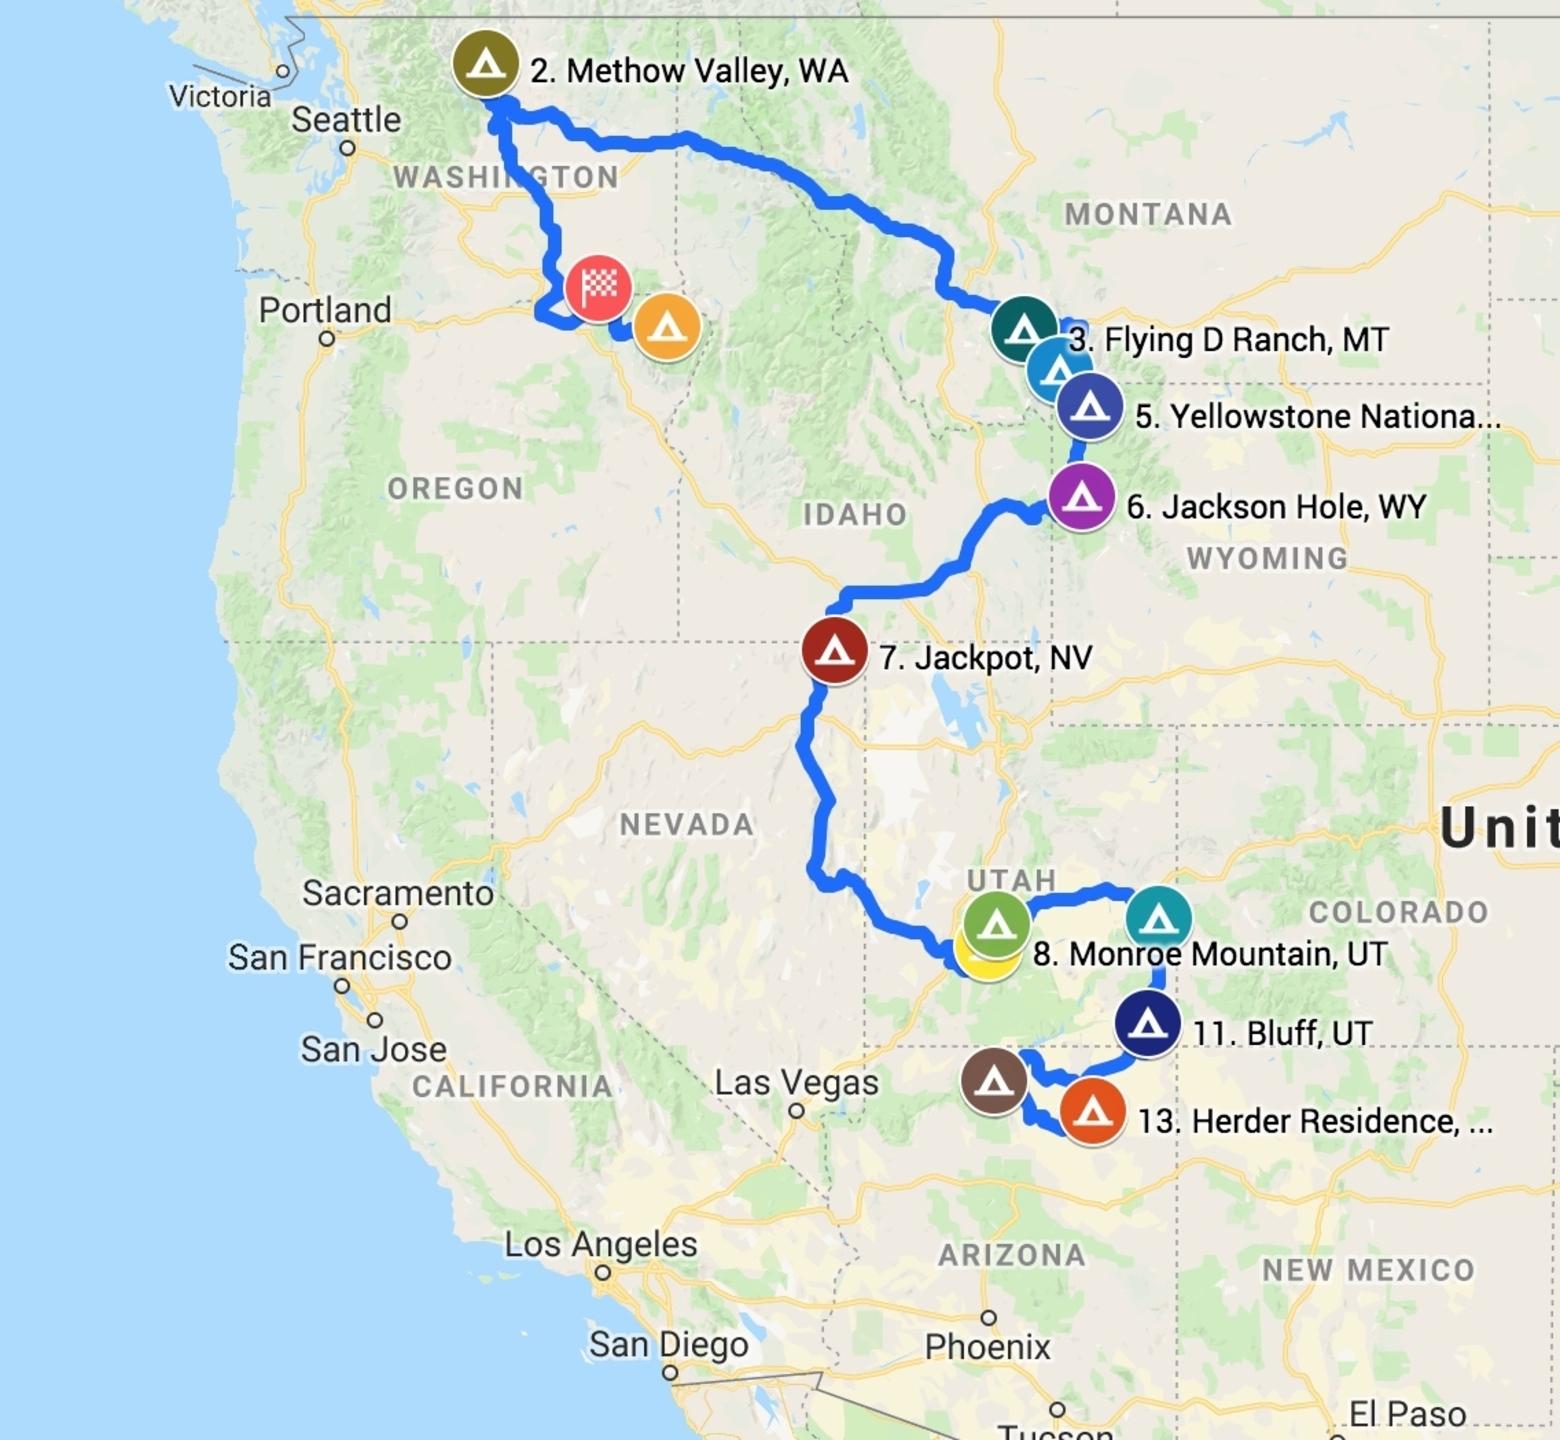 The route of Whitman College's Semester in the West in autumn 2018.